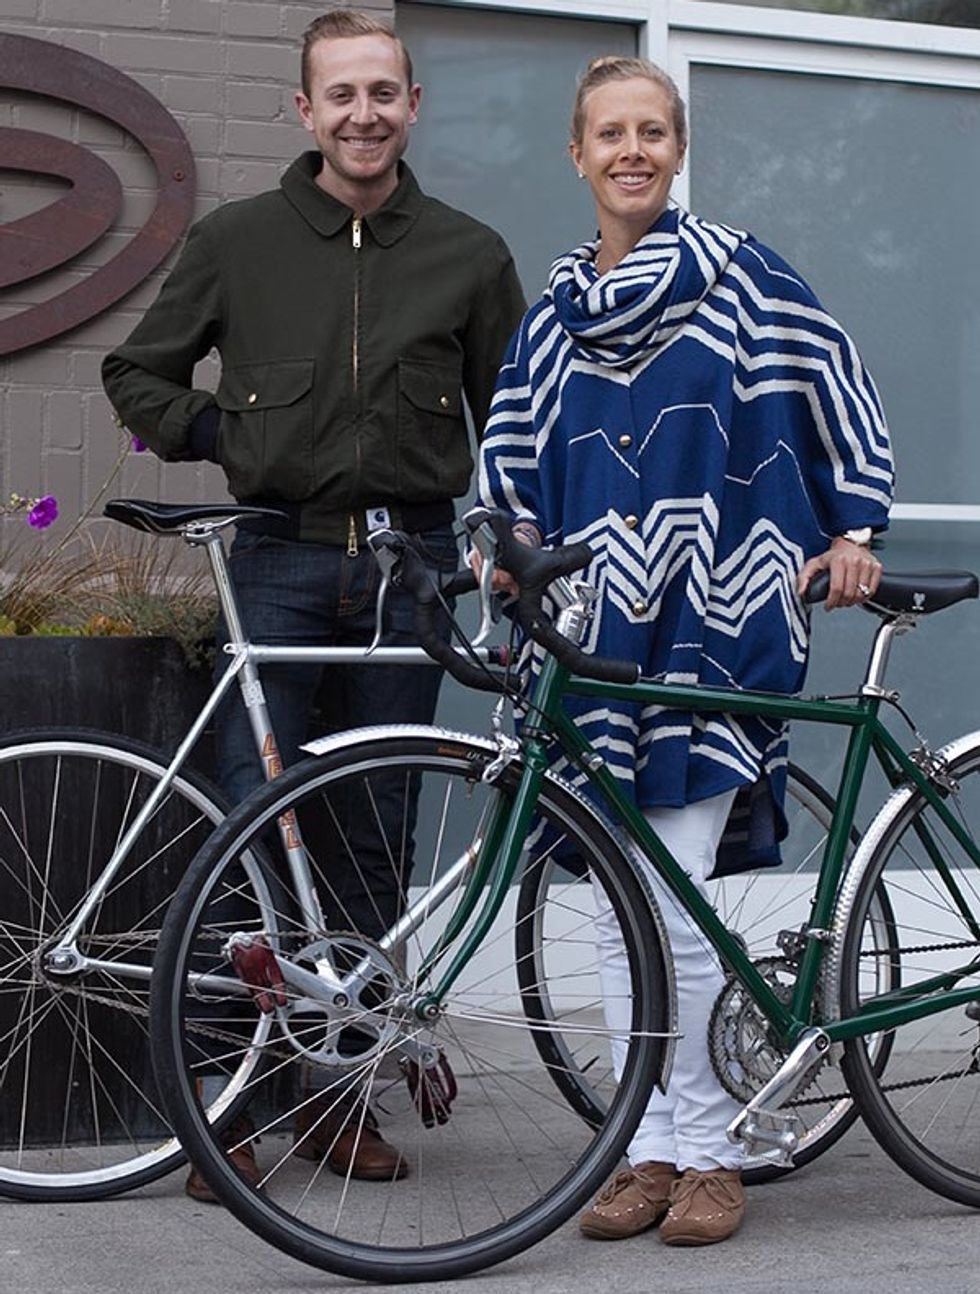 Street Style Report: Two Timbuk2 Employees Show Us Four Bike-Friendly Looks in The Mission